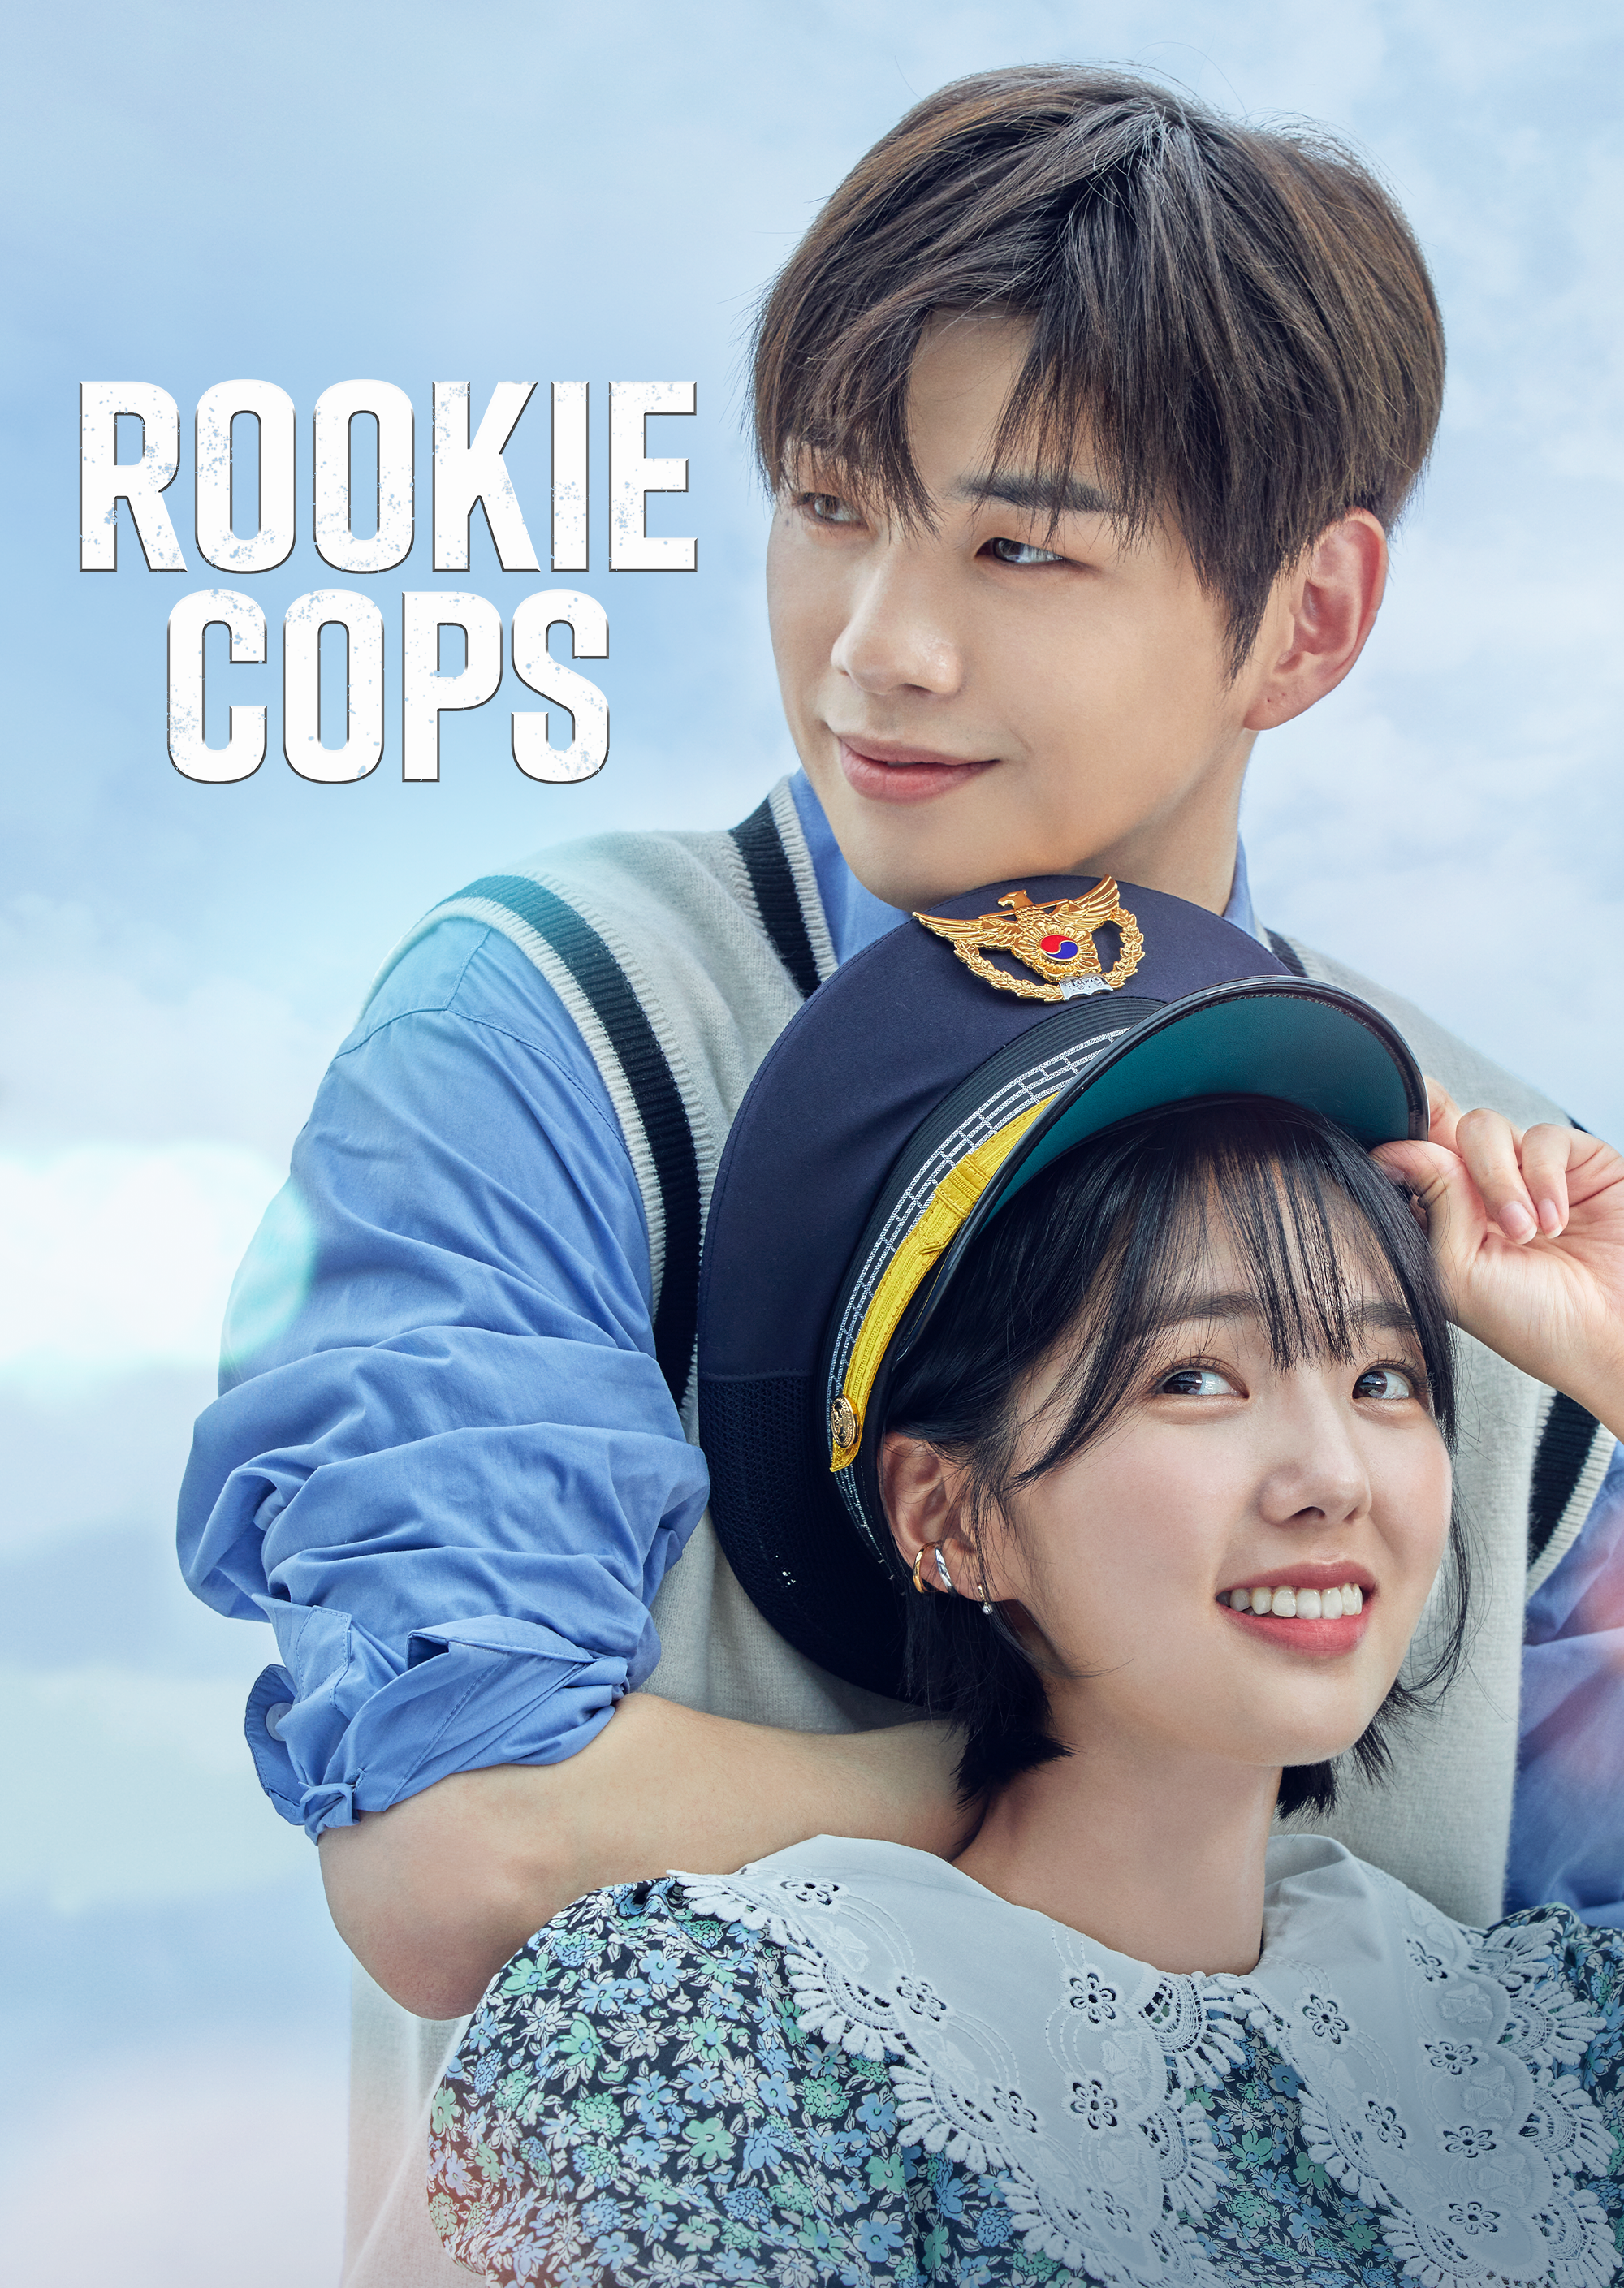 Rookie cops| now streaming